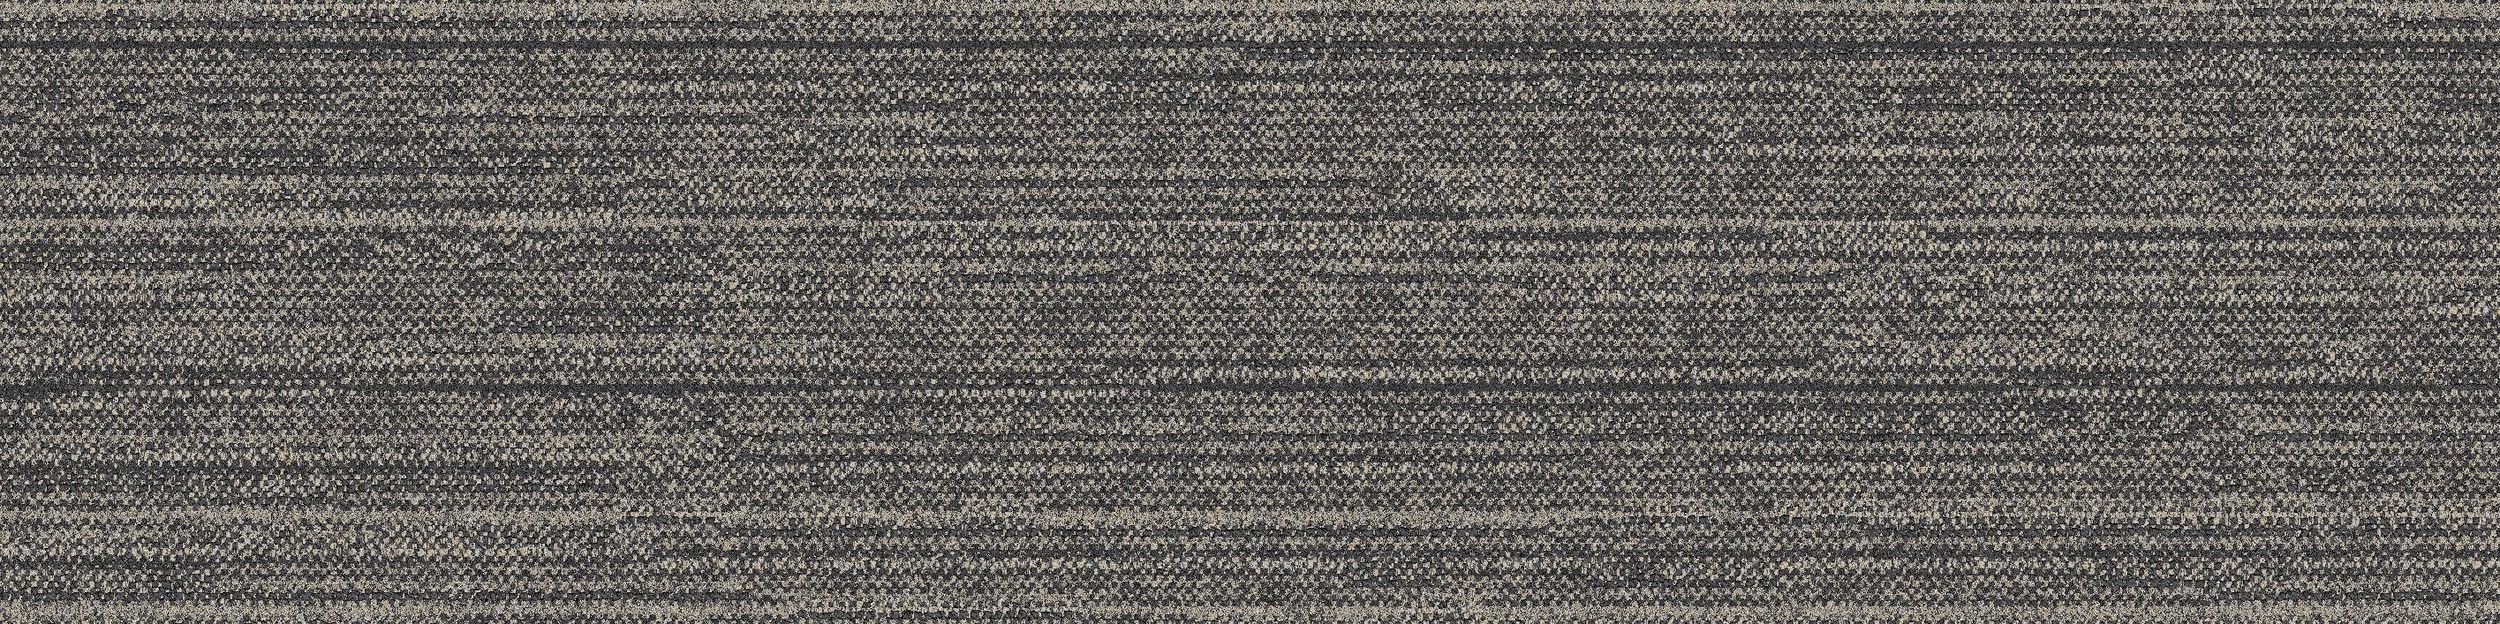 WW880 Carpet Tile In Charcoal Loom image number 2